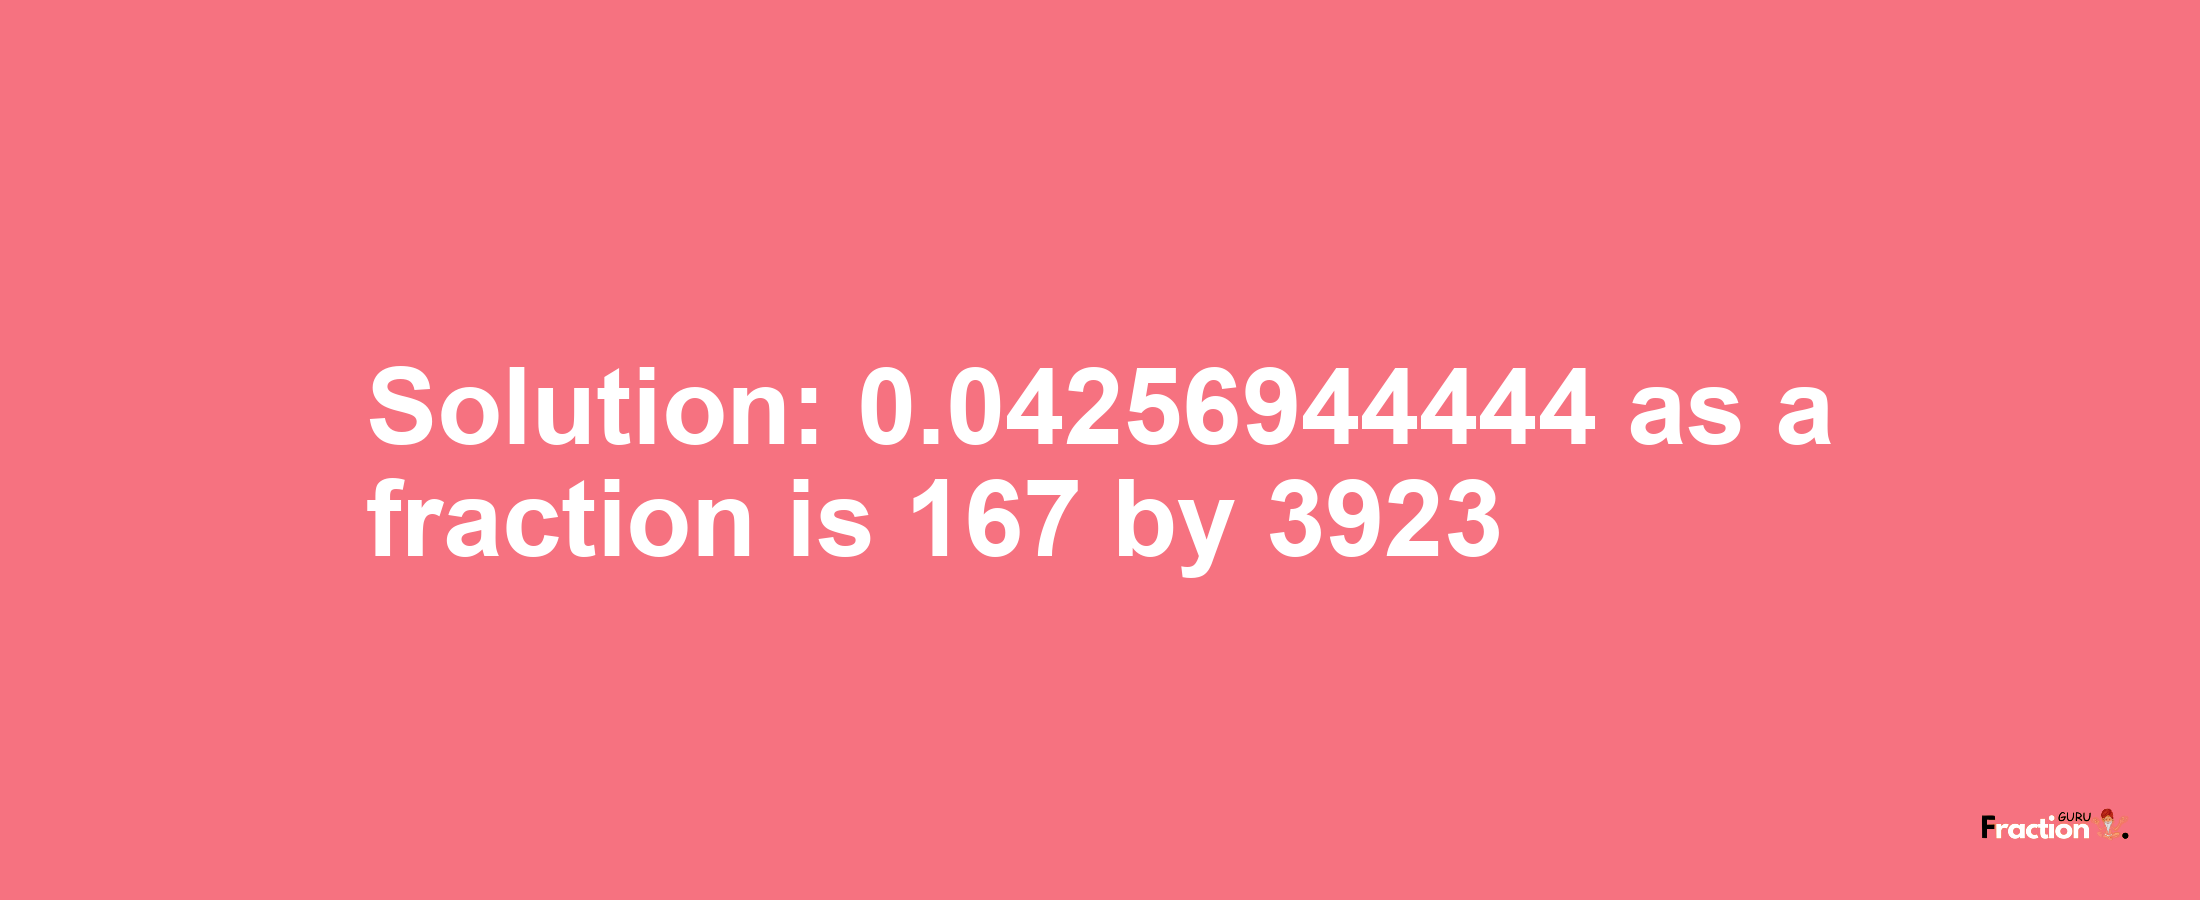 Solution:0.04256944444 as a fraction is 167/3923